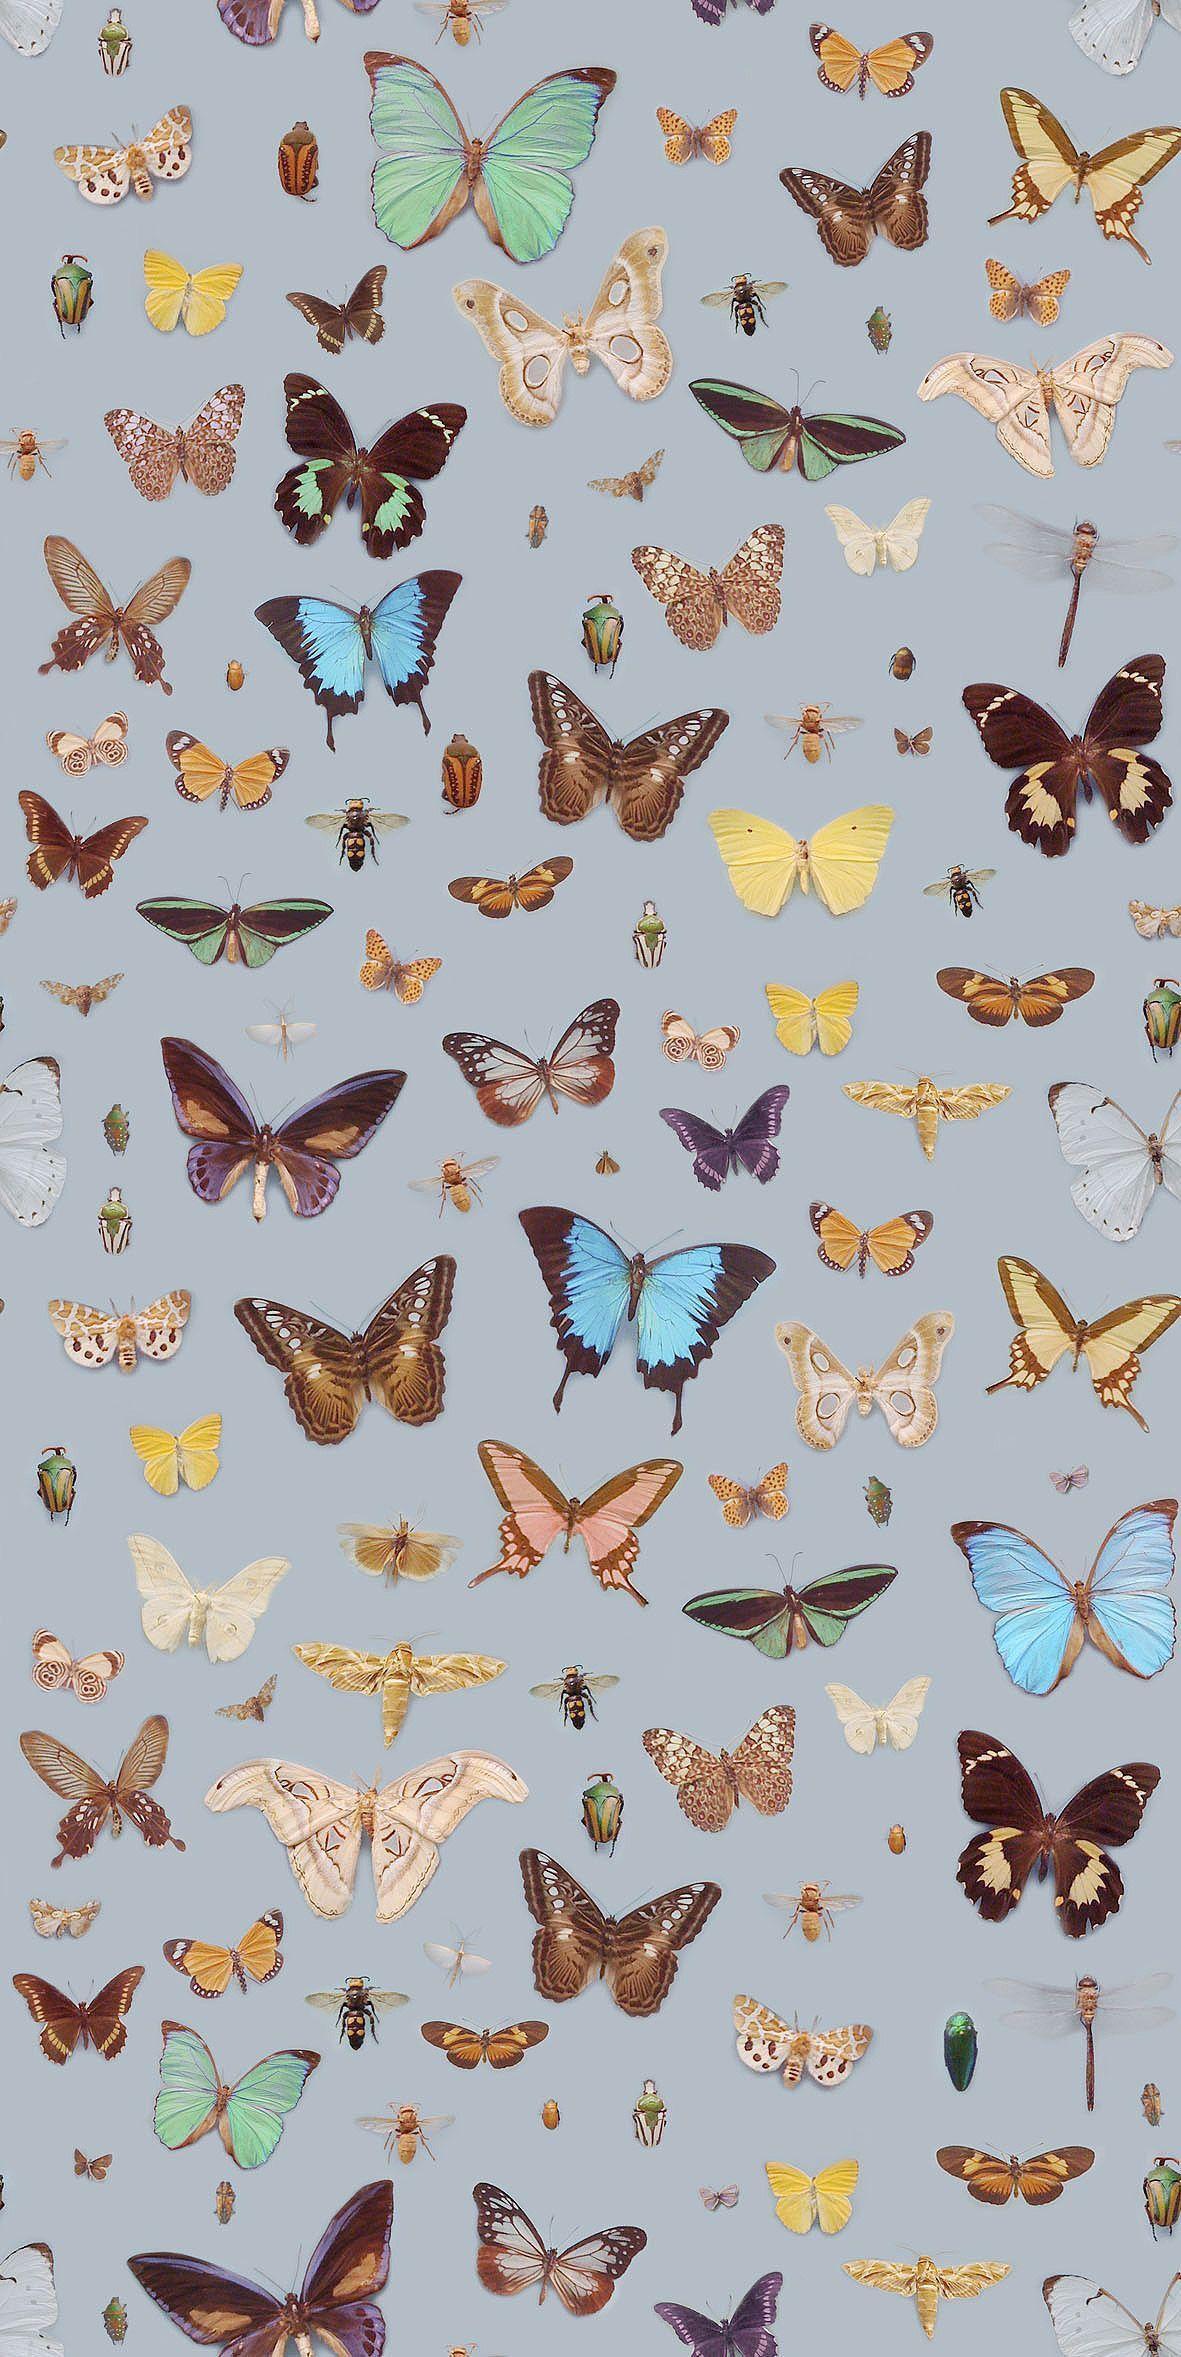 Aesthetic Butterfly Wallpapers - Top Free Aesthetic ...